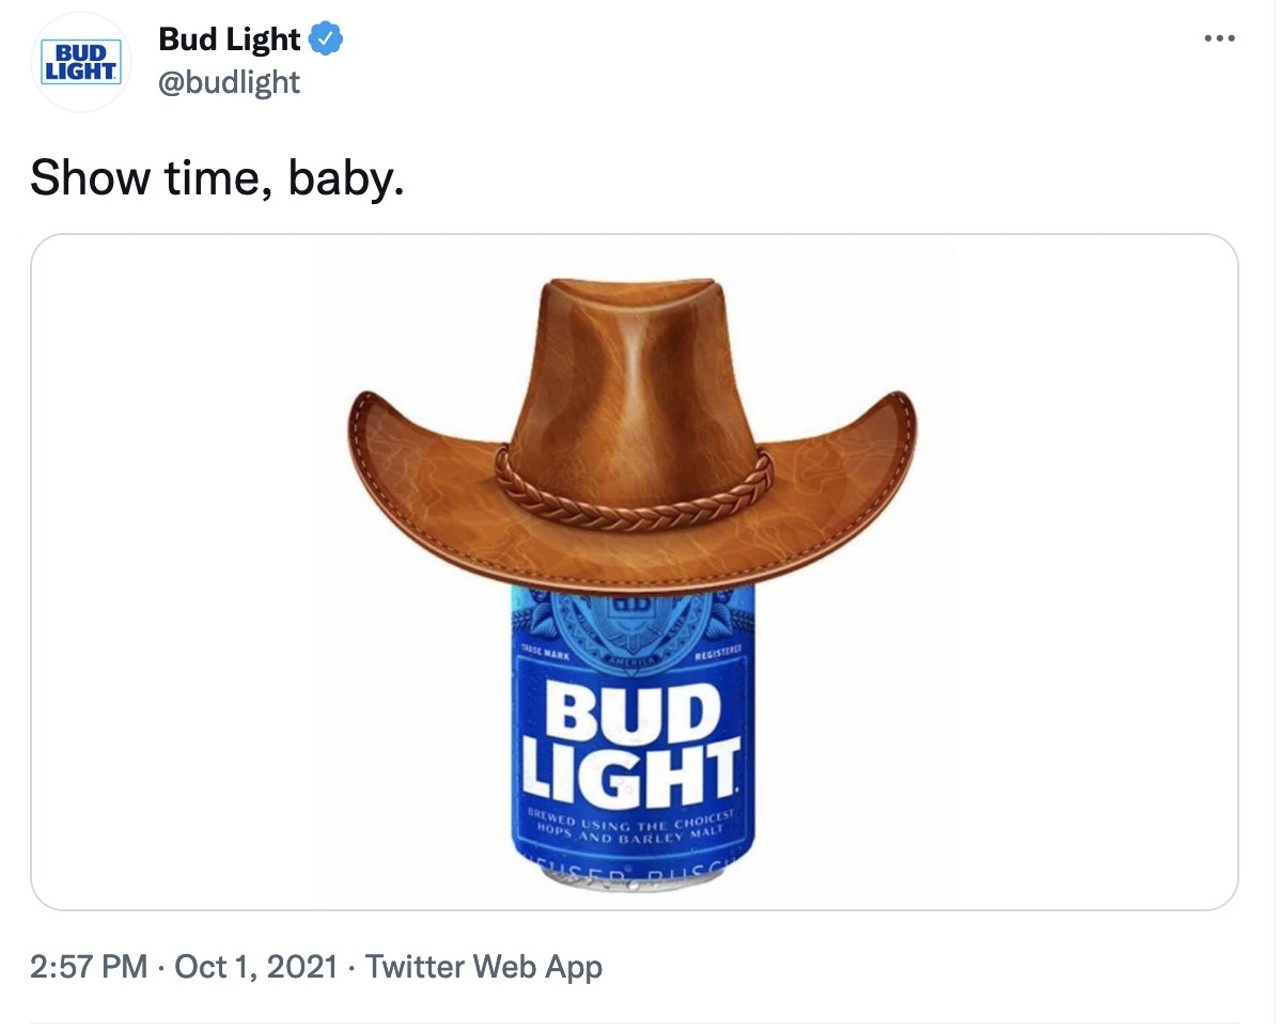 Bud Light Can 
What's more quintessentially San Antonio than a cool, refreshing and nearly flavor-free can of Bud Light? If you're attending a Halloween cookout, just be warned some tipsy guy may attempt to drink you.
Photo via Twitter / budlight